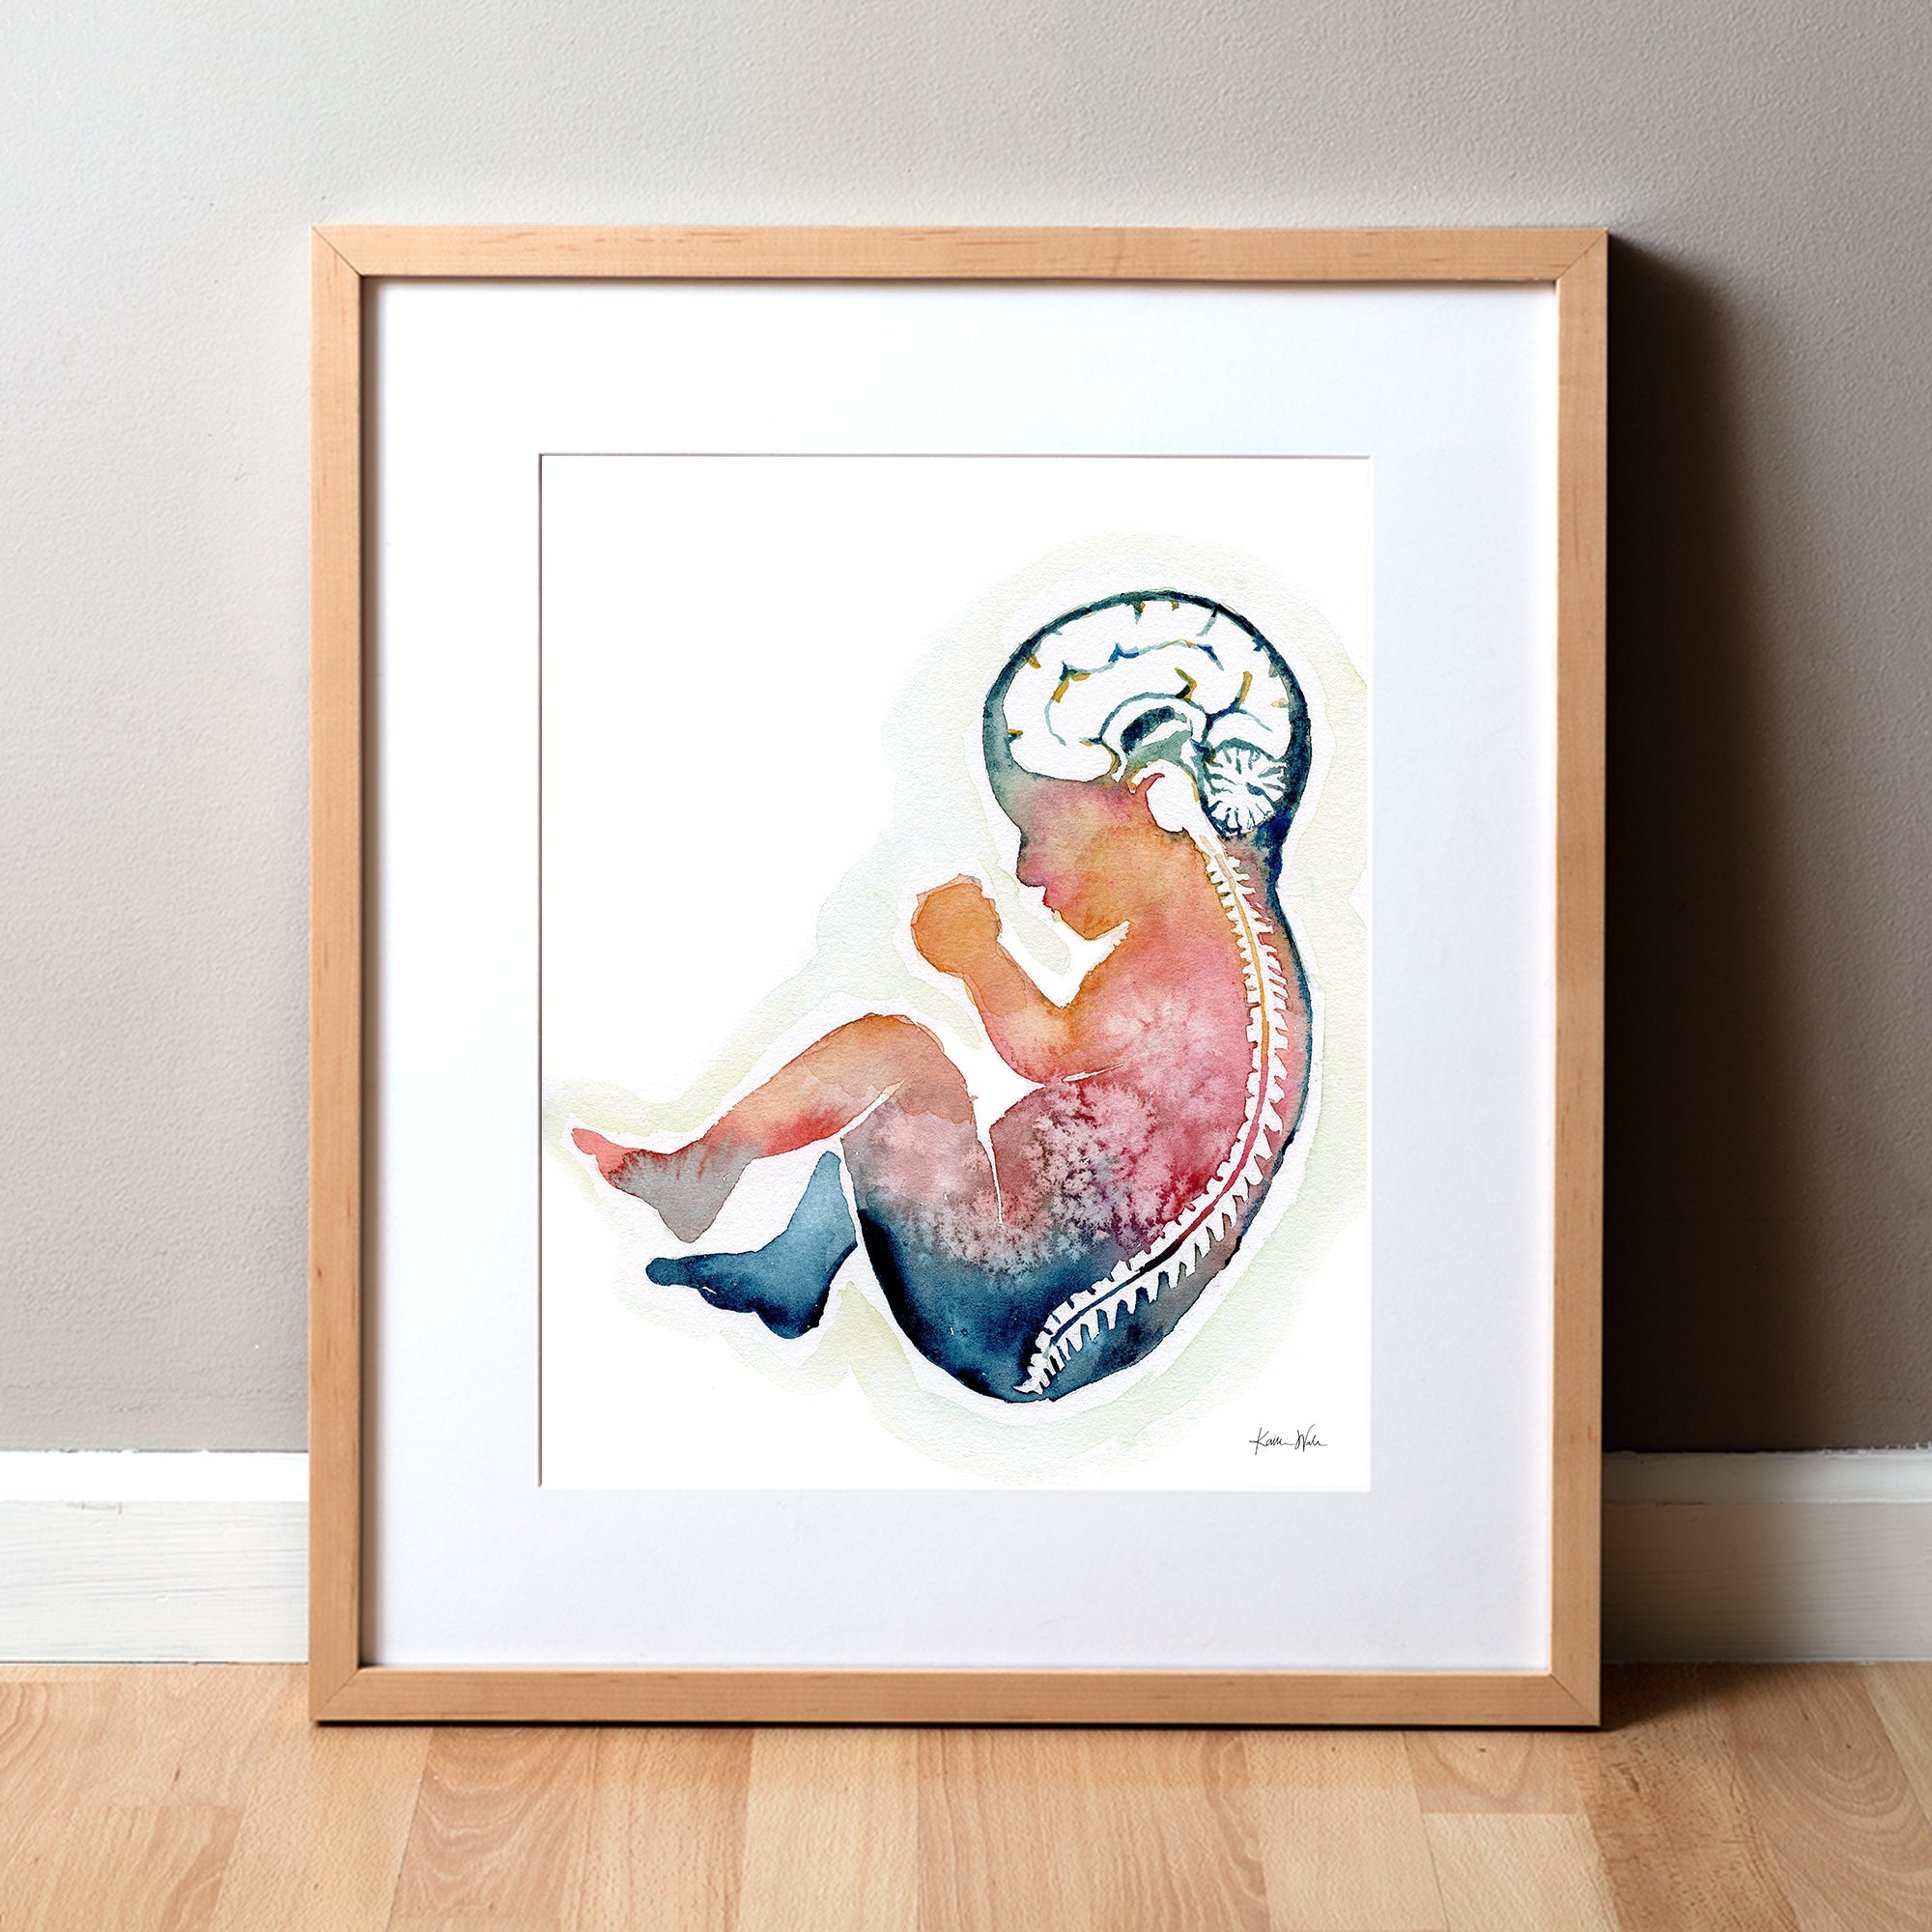 Framed watercolor painting of a fetus showing the spine and brain in rainbow colors.